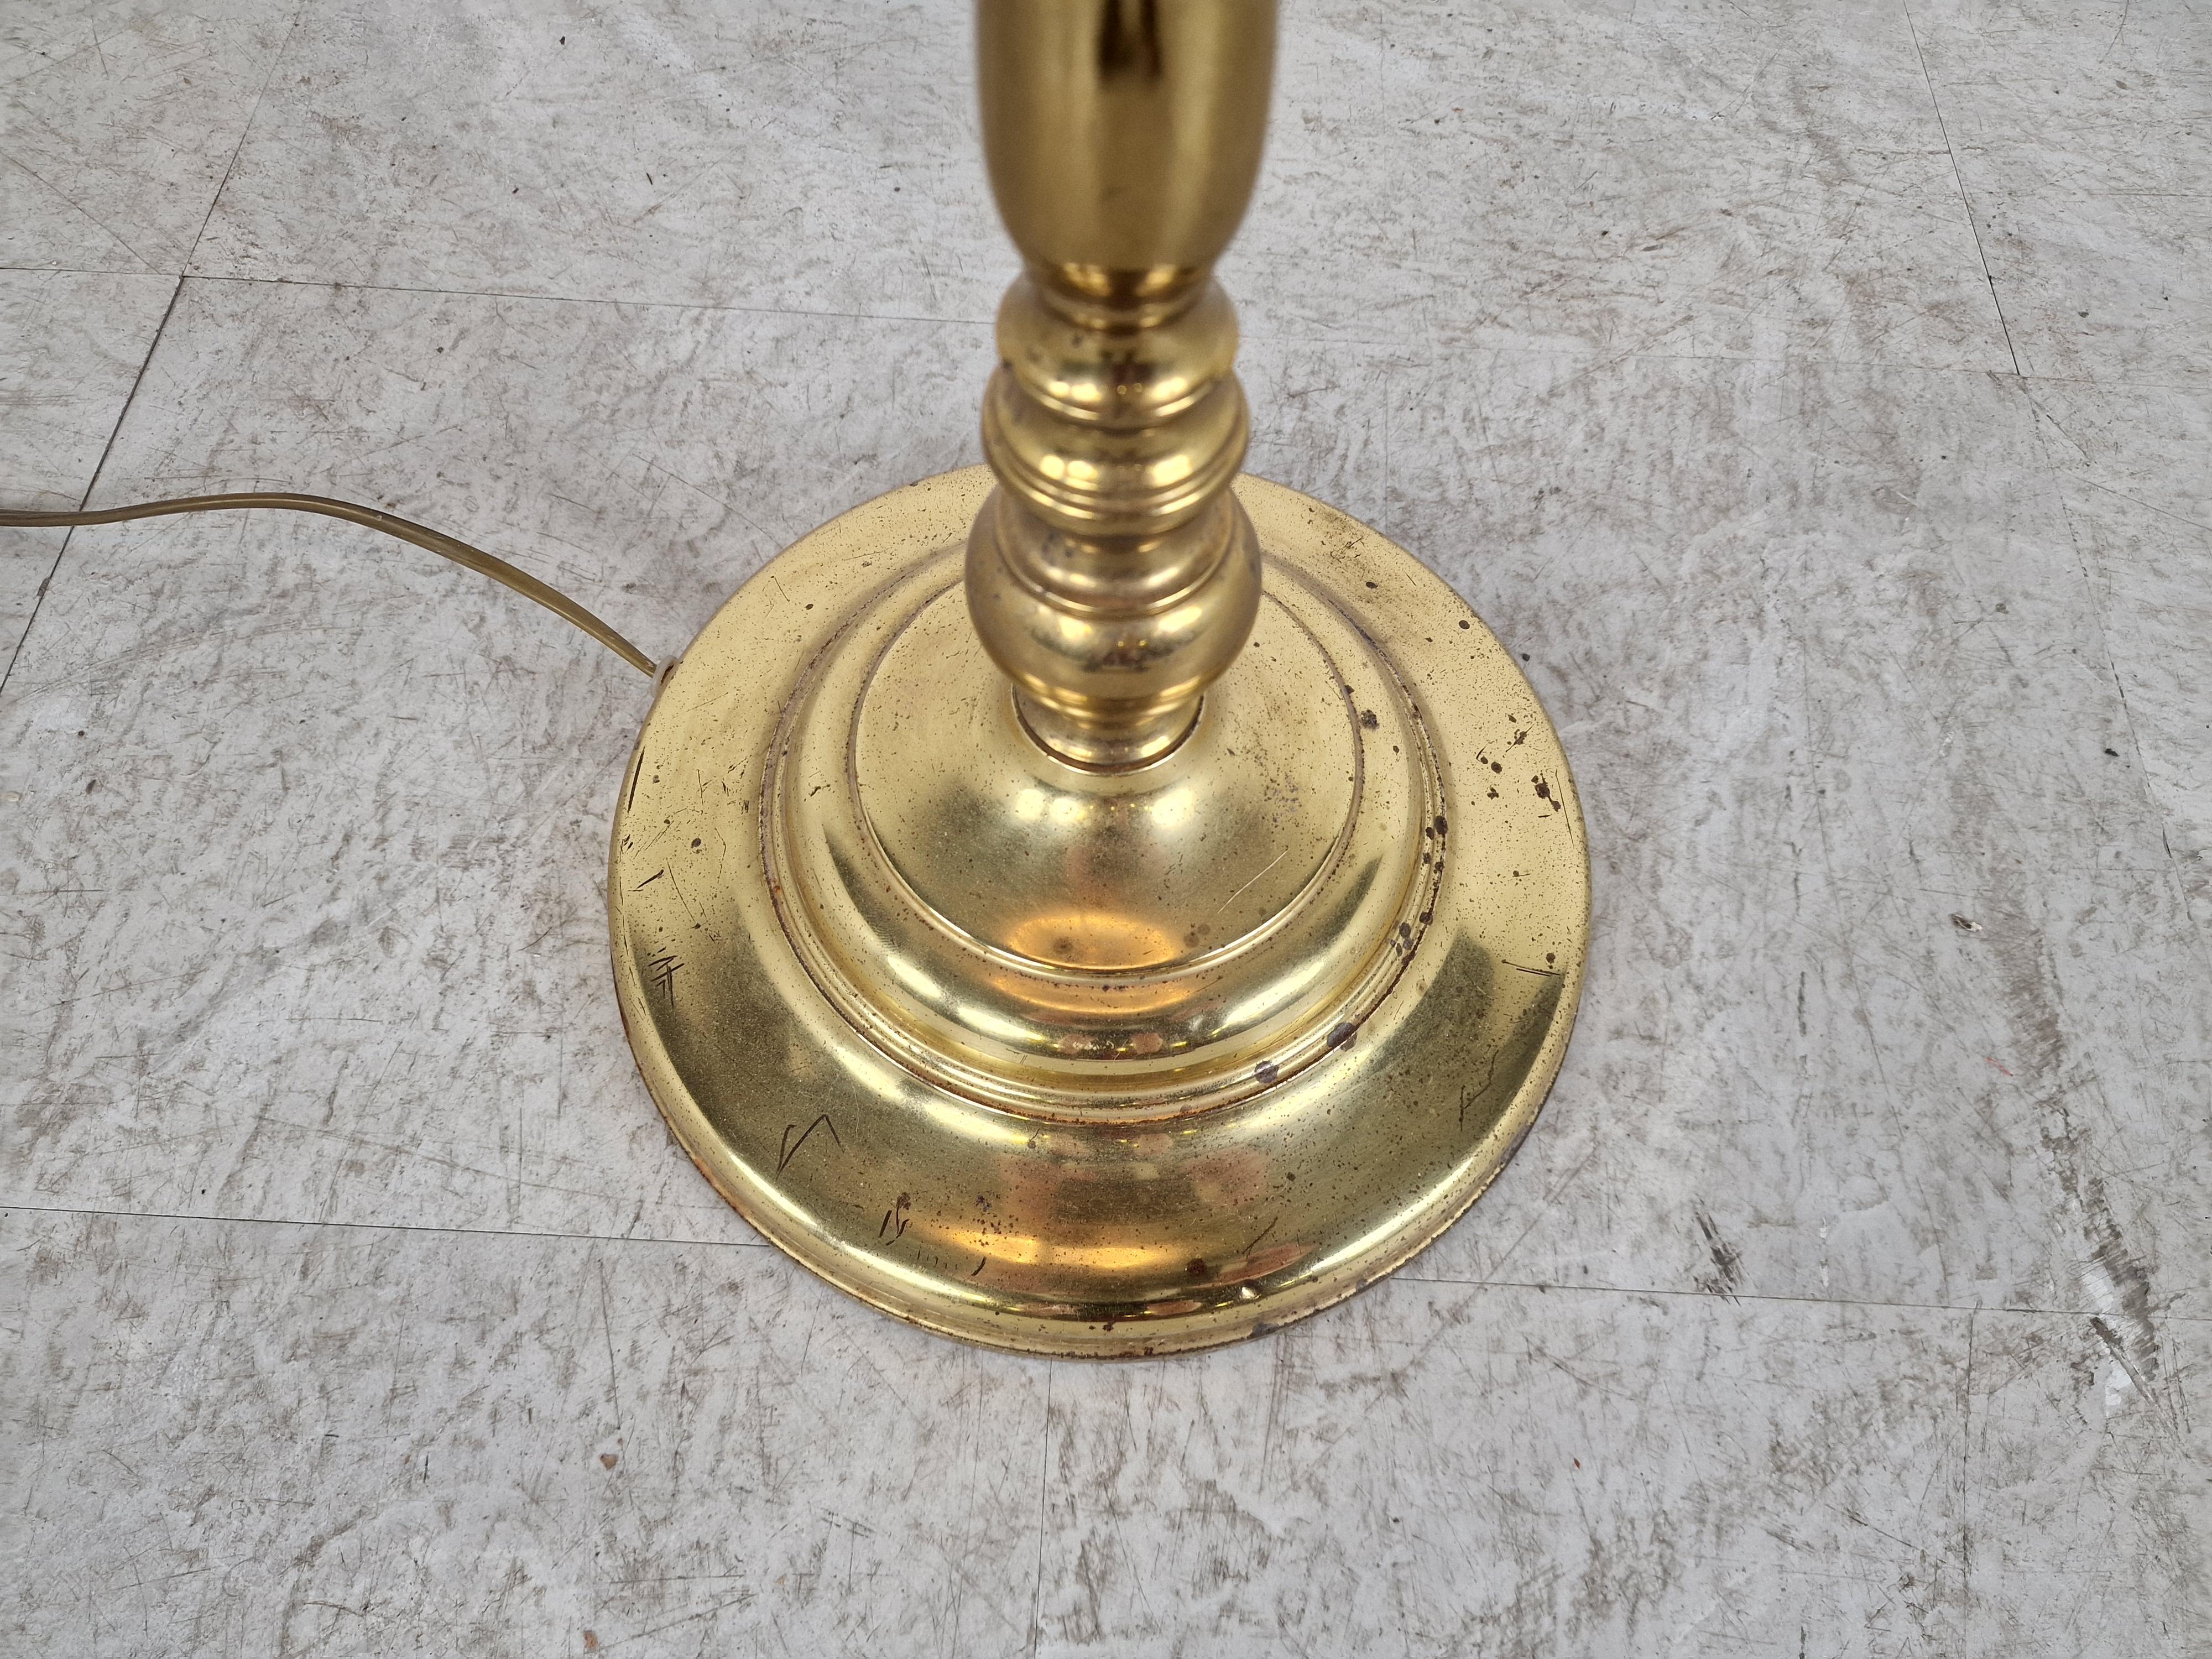 Vintage Brass Faux Bamboo Floorlamp, 1970s 1